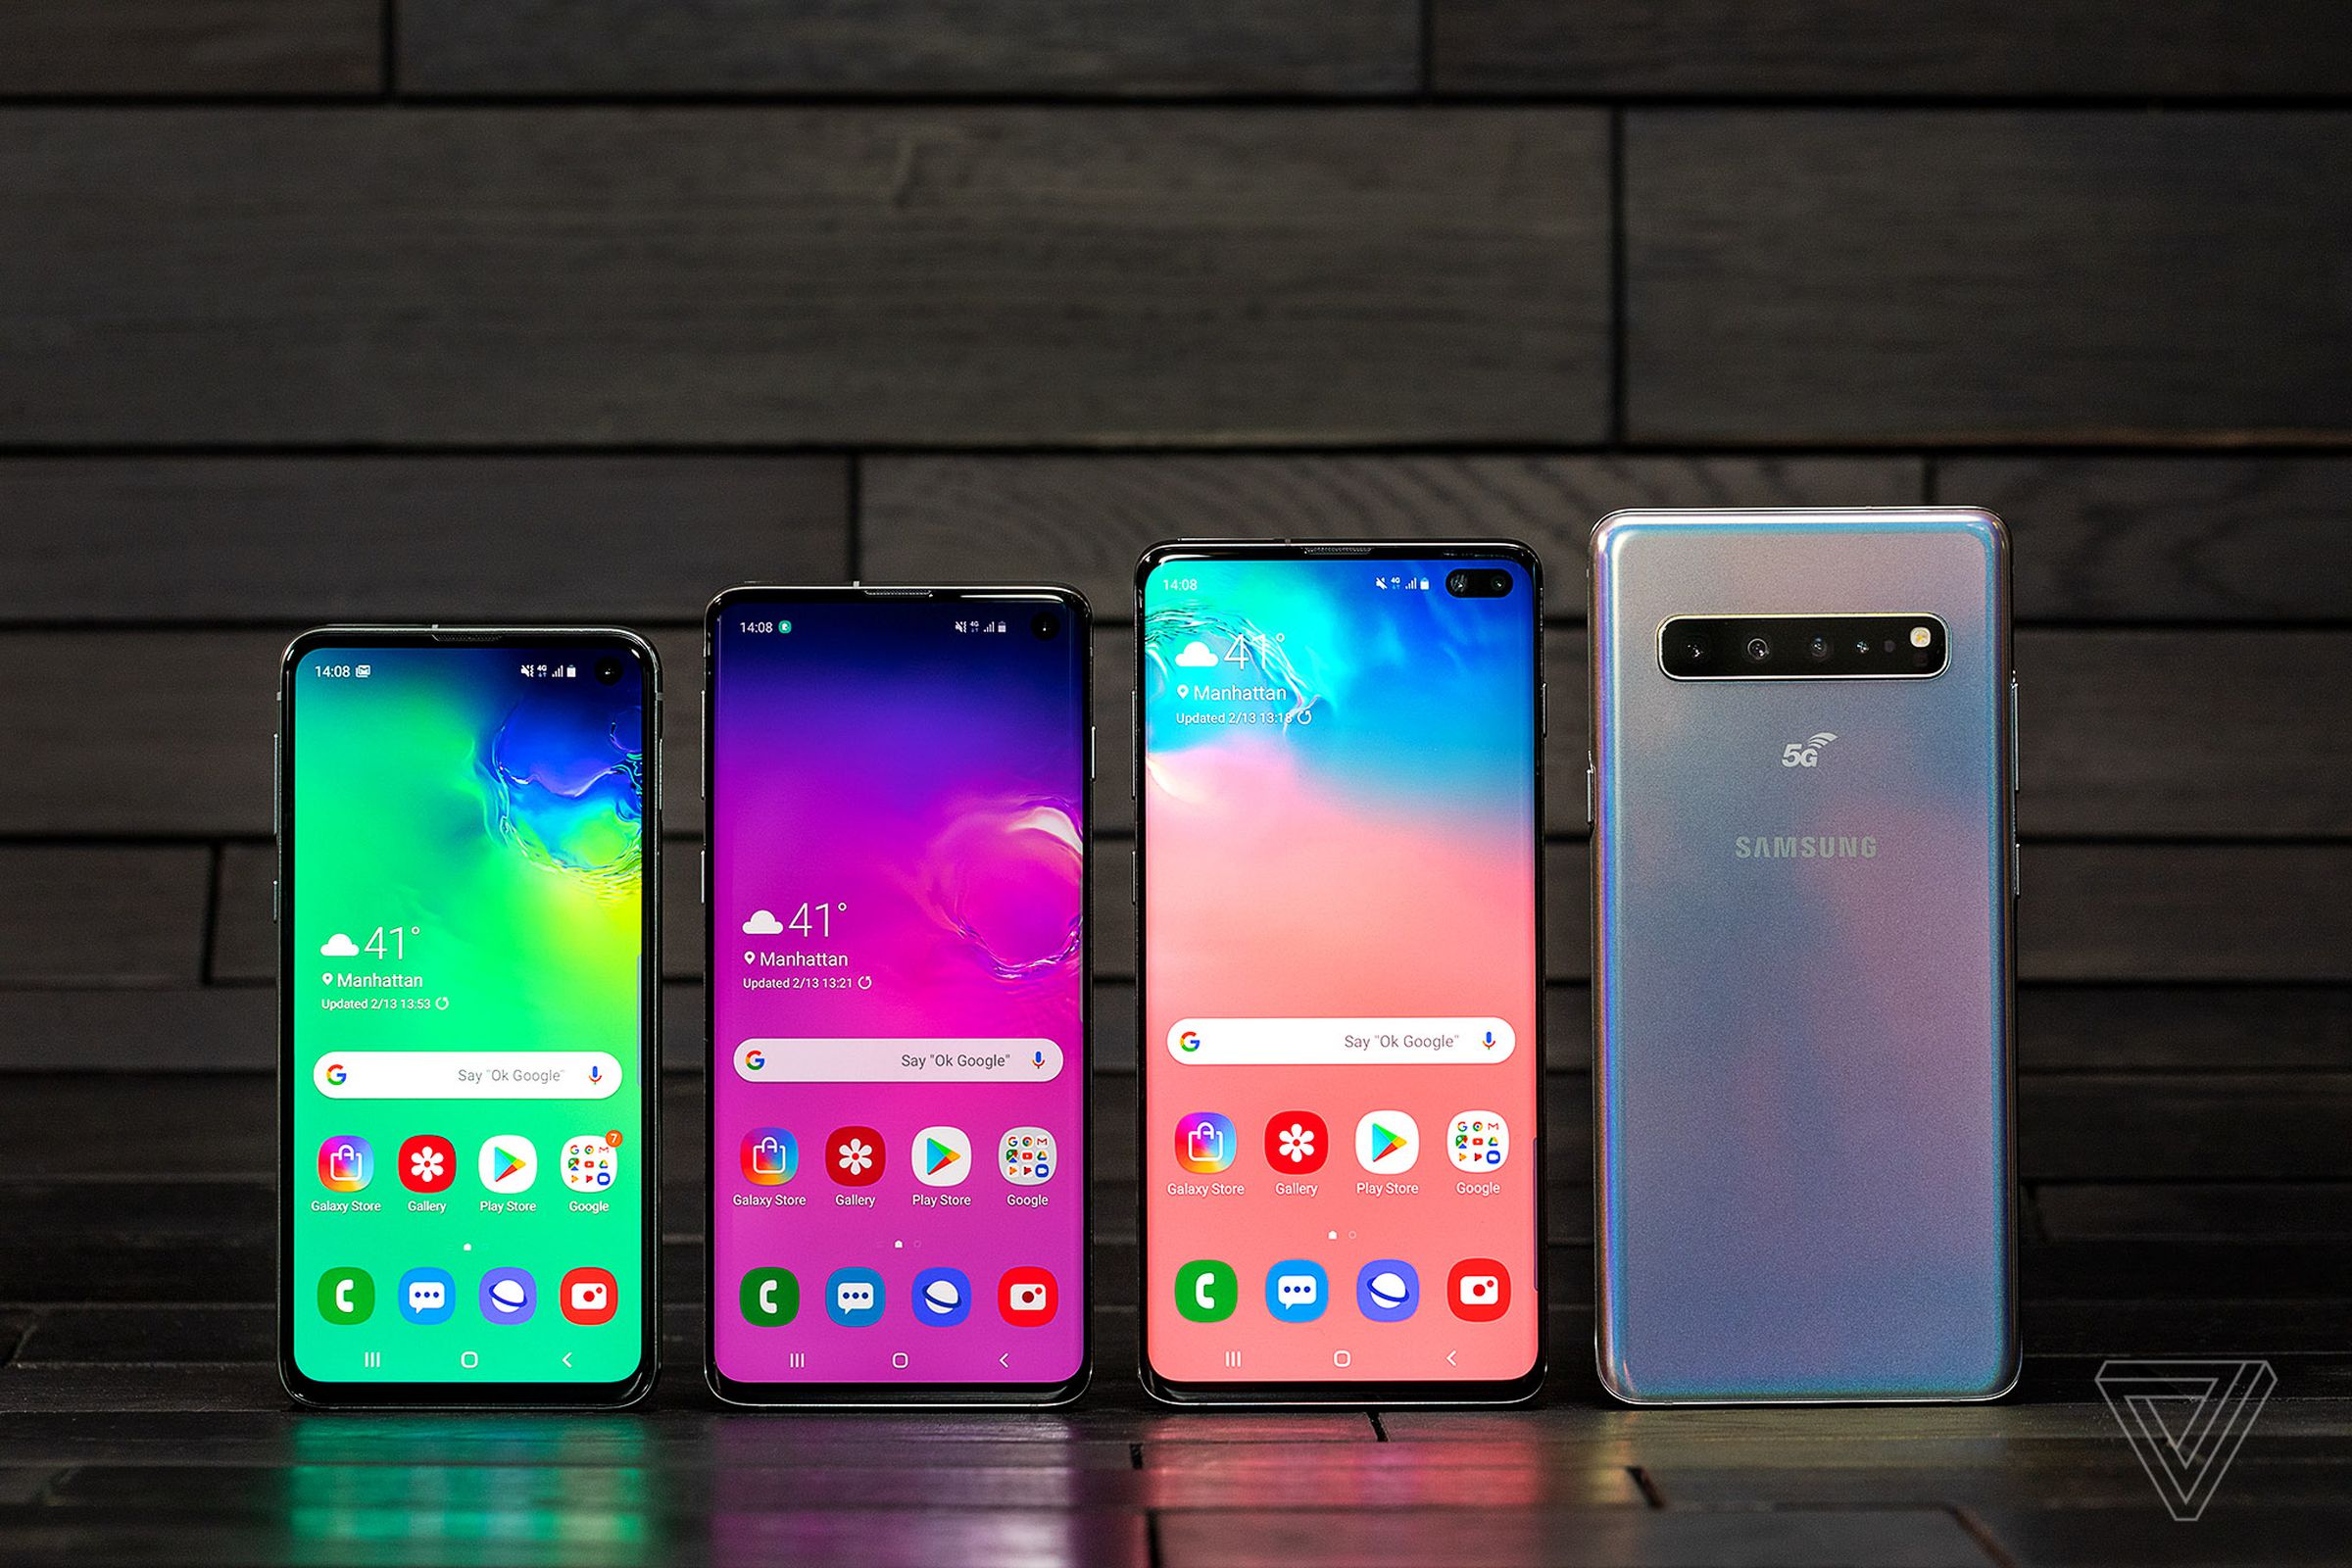 The Galaxy S10 5G is the biggest of the whole lineup.